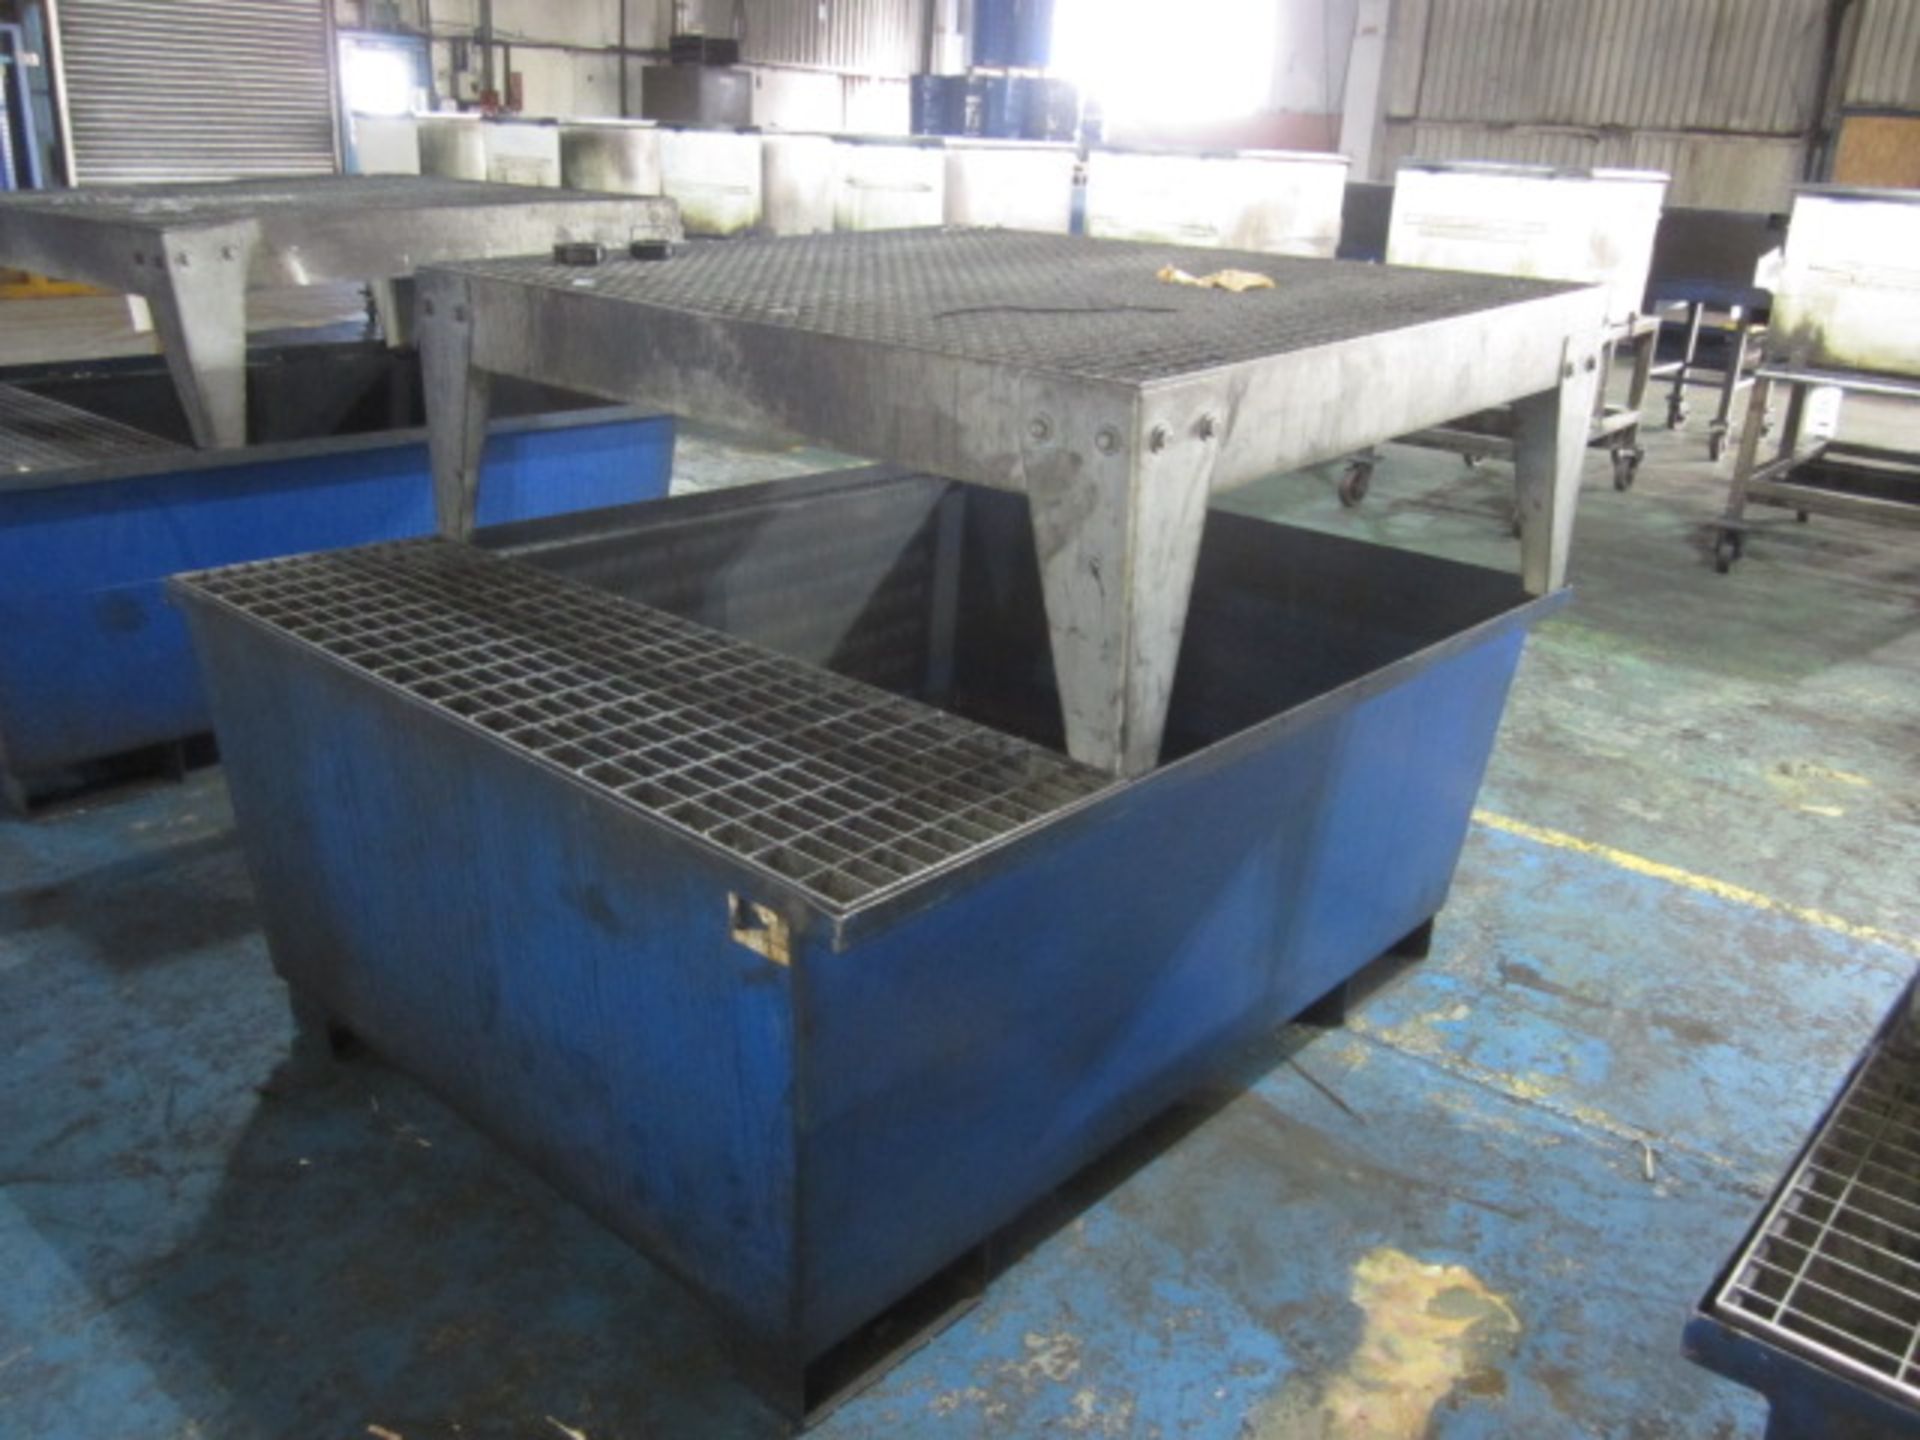 Metal fabricated spill tanks with mesh drainage floor, 1350 x 1650 x H 1180mm - Image 2 of 2